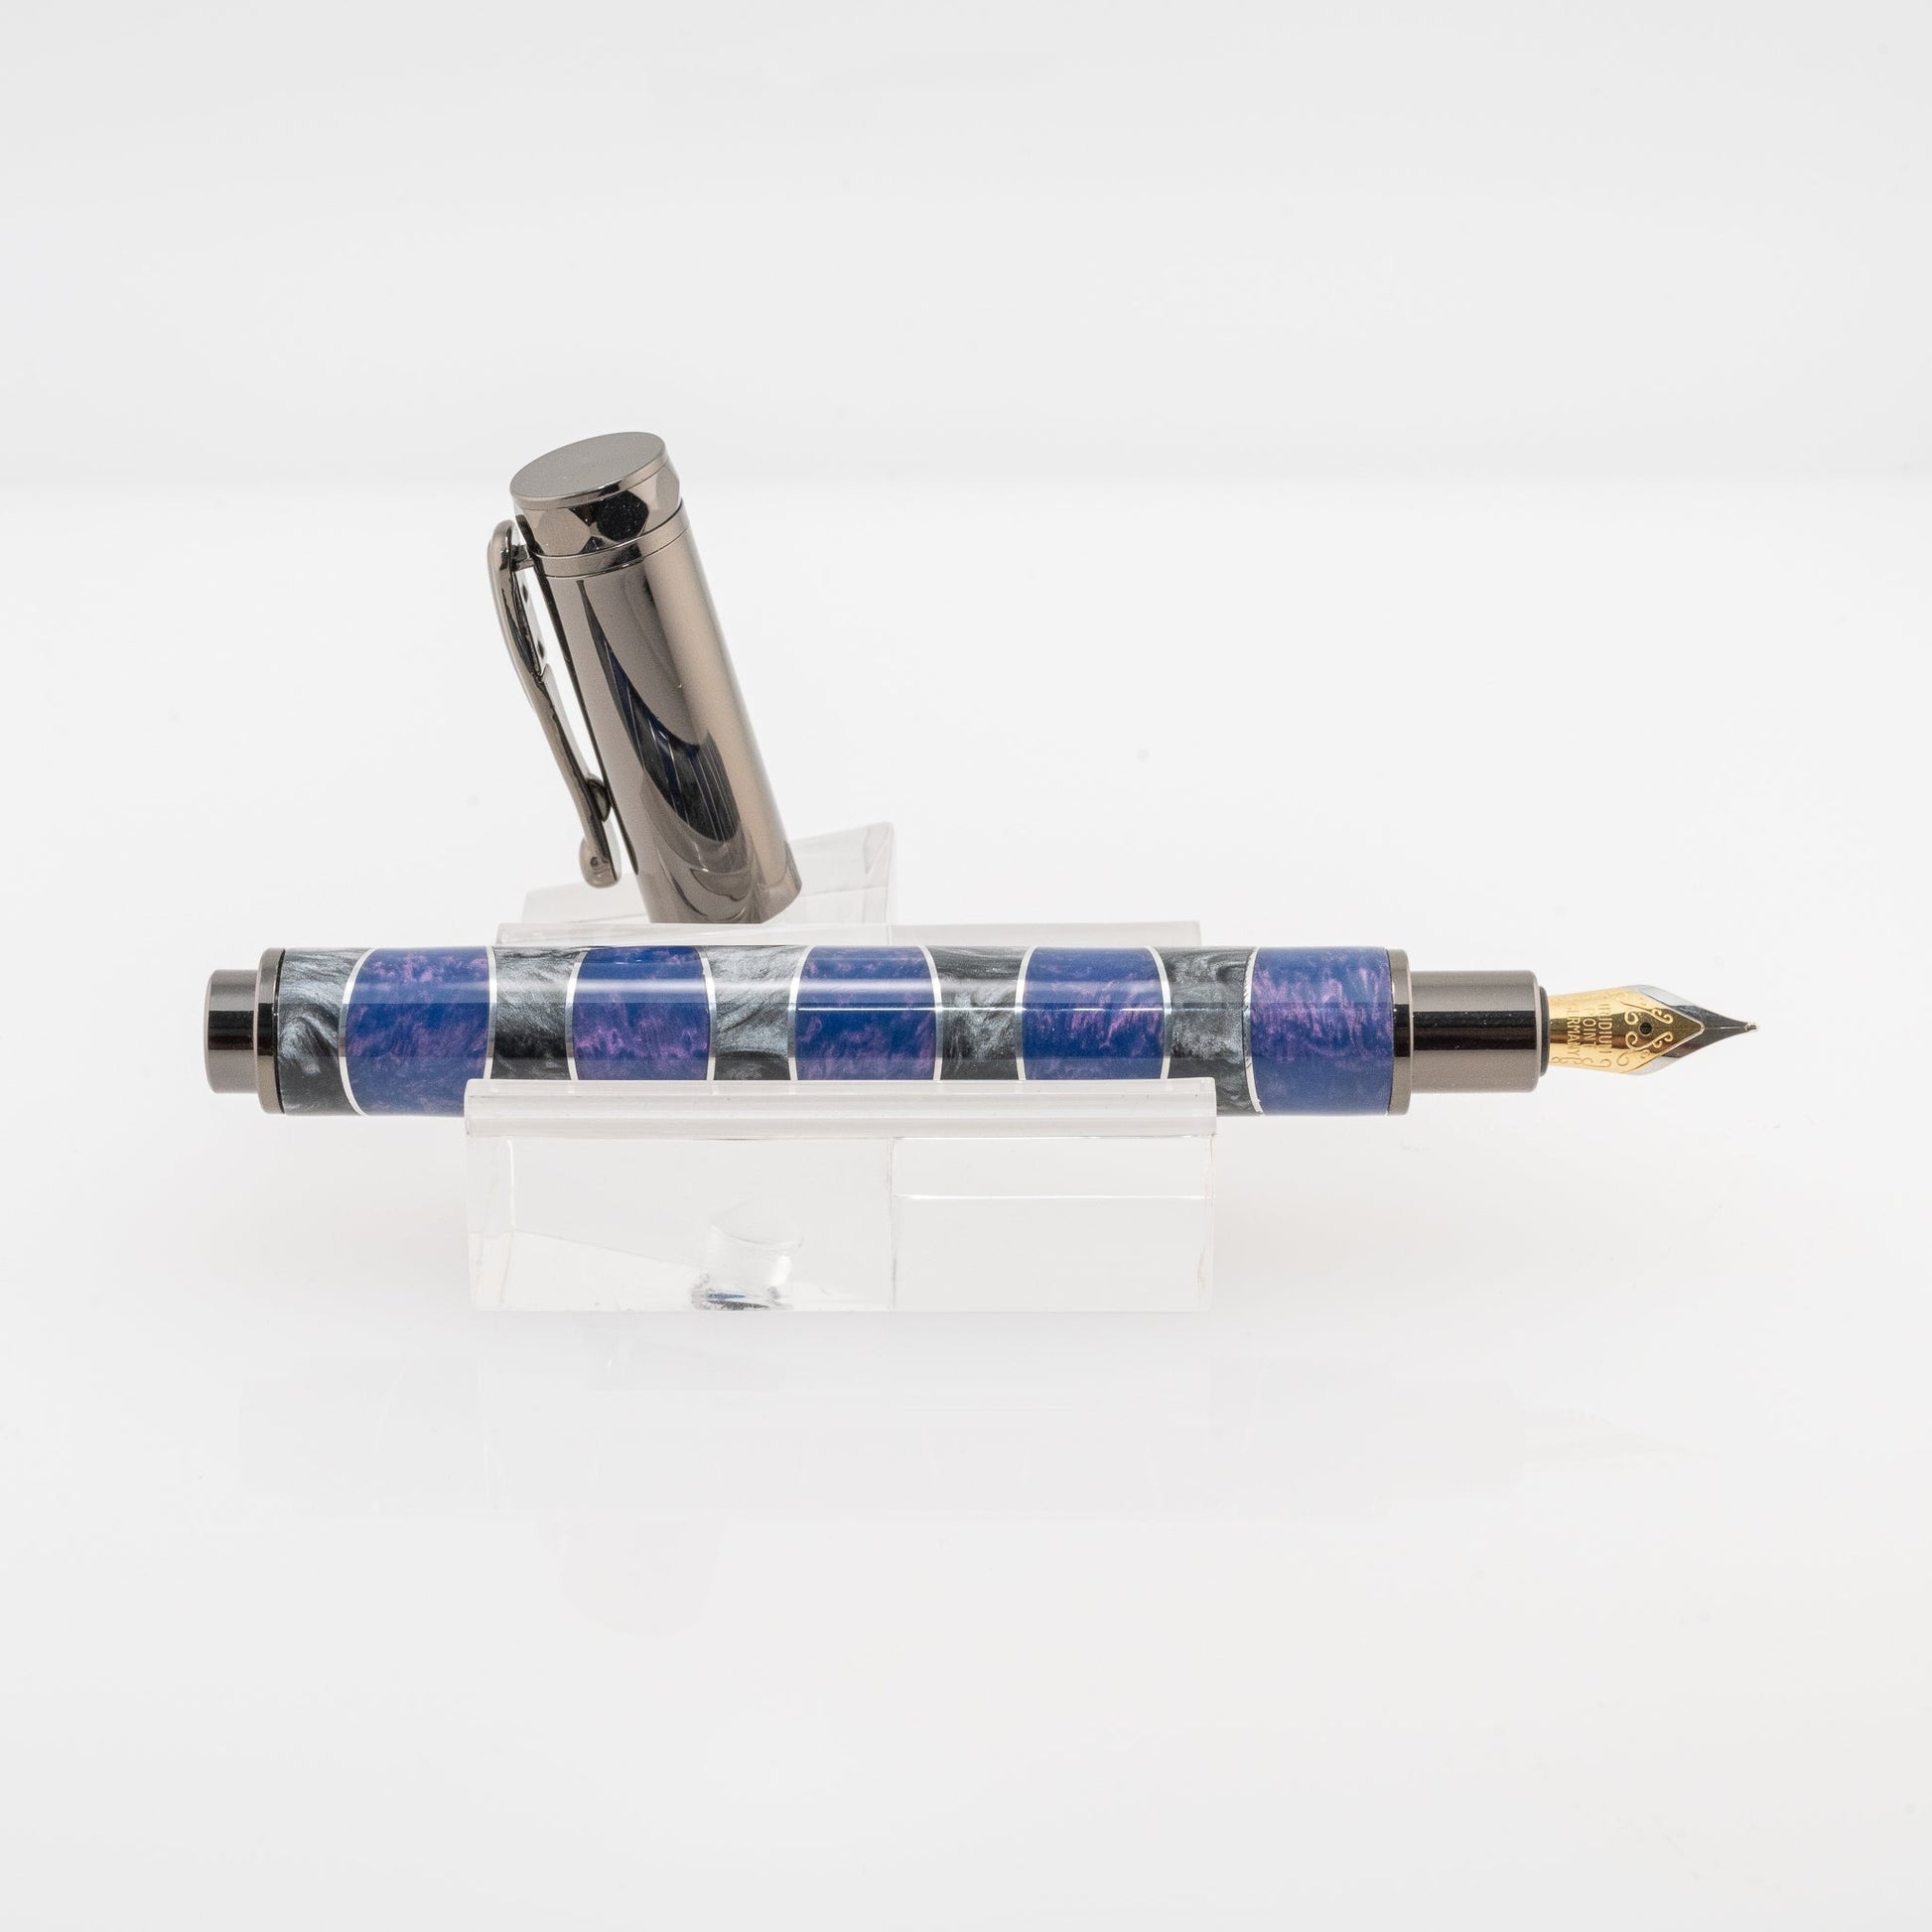 A handmade purple and silver resin and aluminum fountain pen rests on a clear stand. The plating is gunmetal and it features a German Iridium nib.